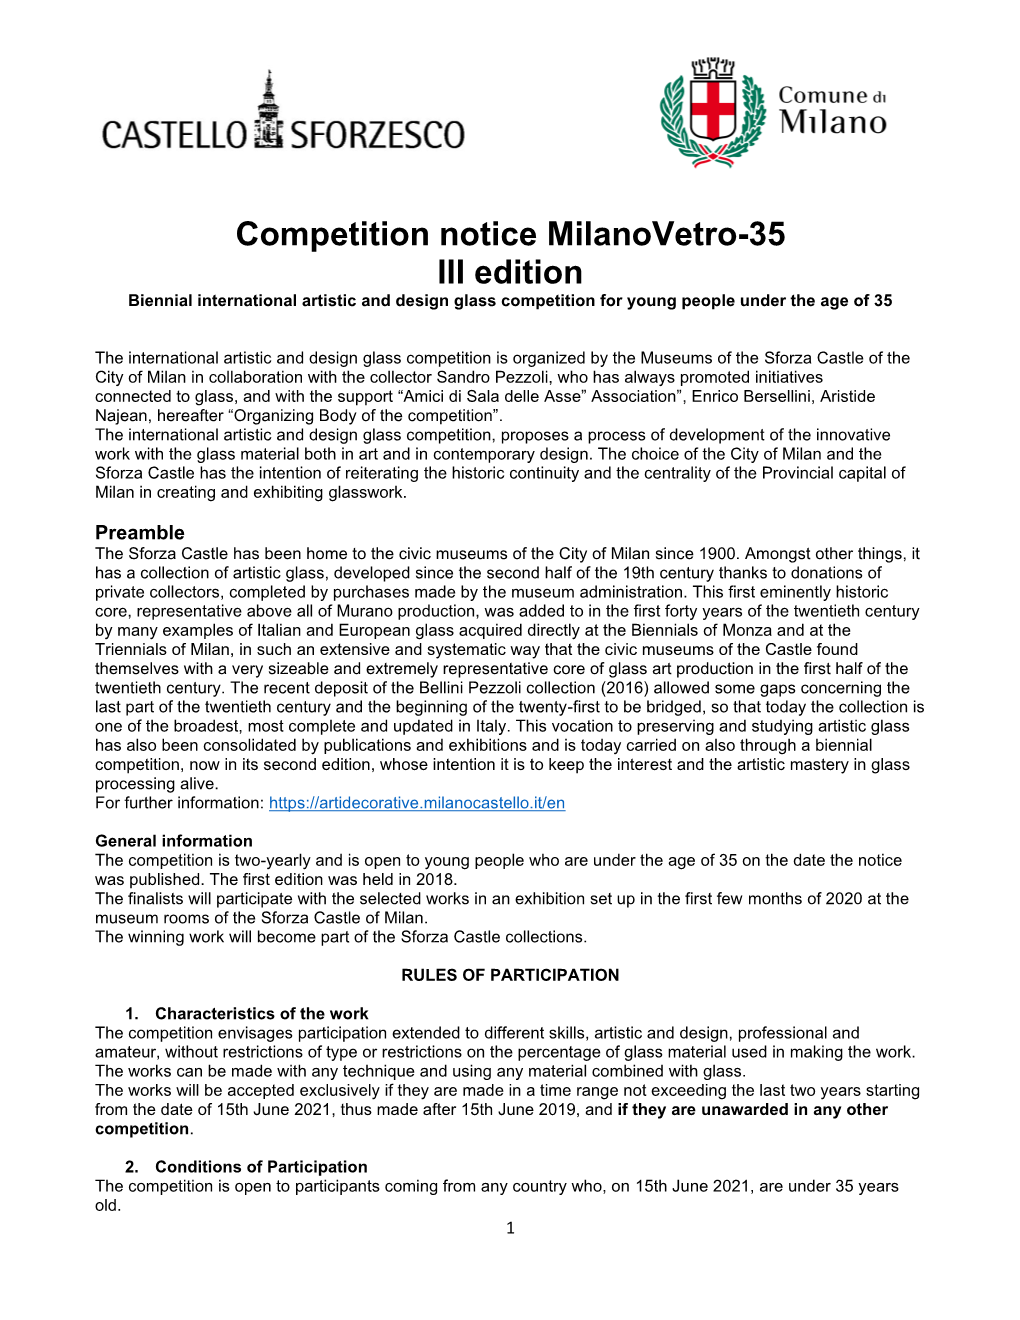 Competition Notice Milanovetro-35 III Edition Biennial International Artistic and Design Glass Competition for Young People Under the Age of 35